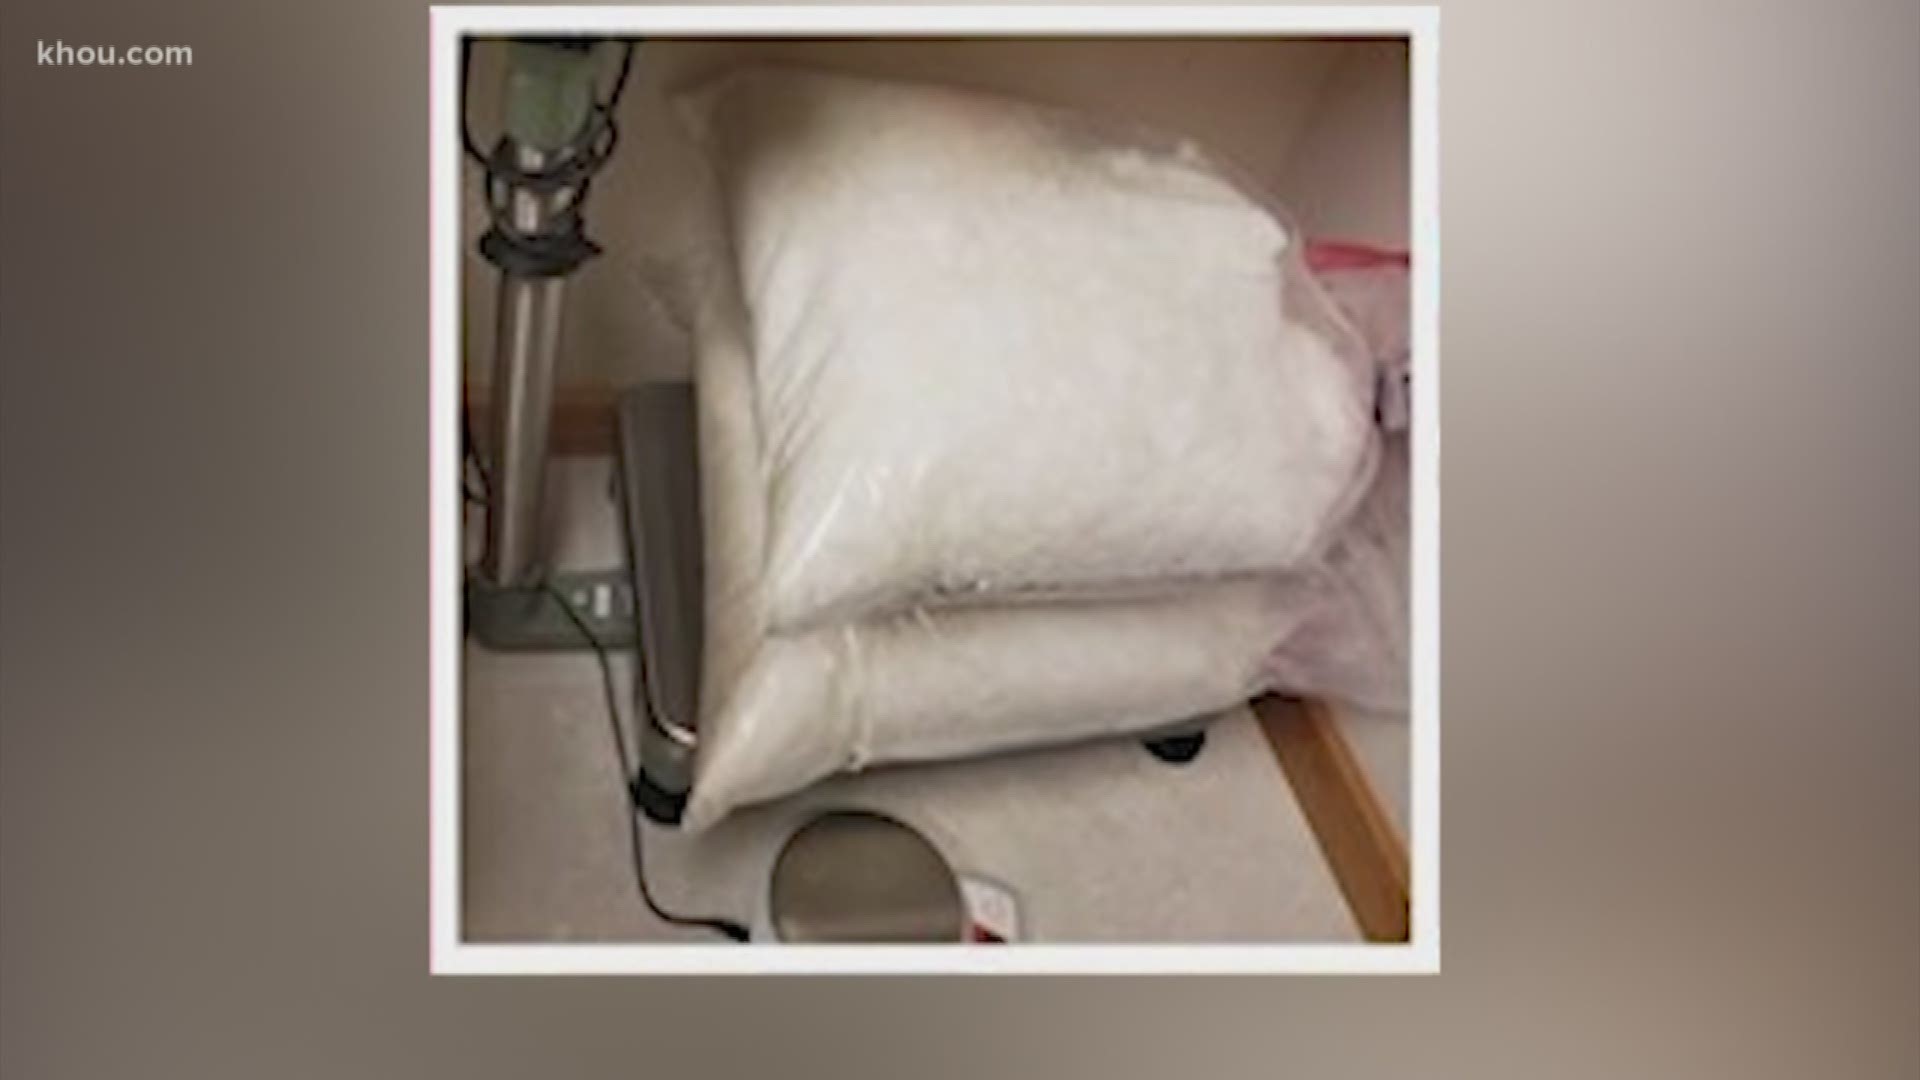 More than $4 million worth of methamphetamine was seized during a traffic stop in Montgomery County in August.